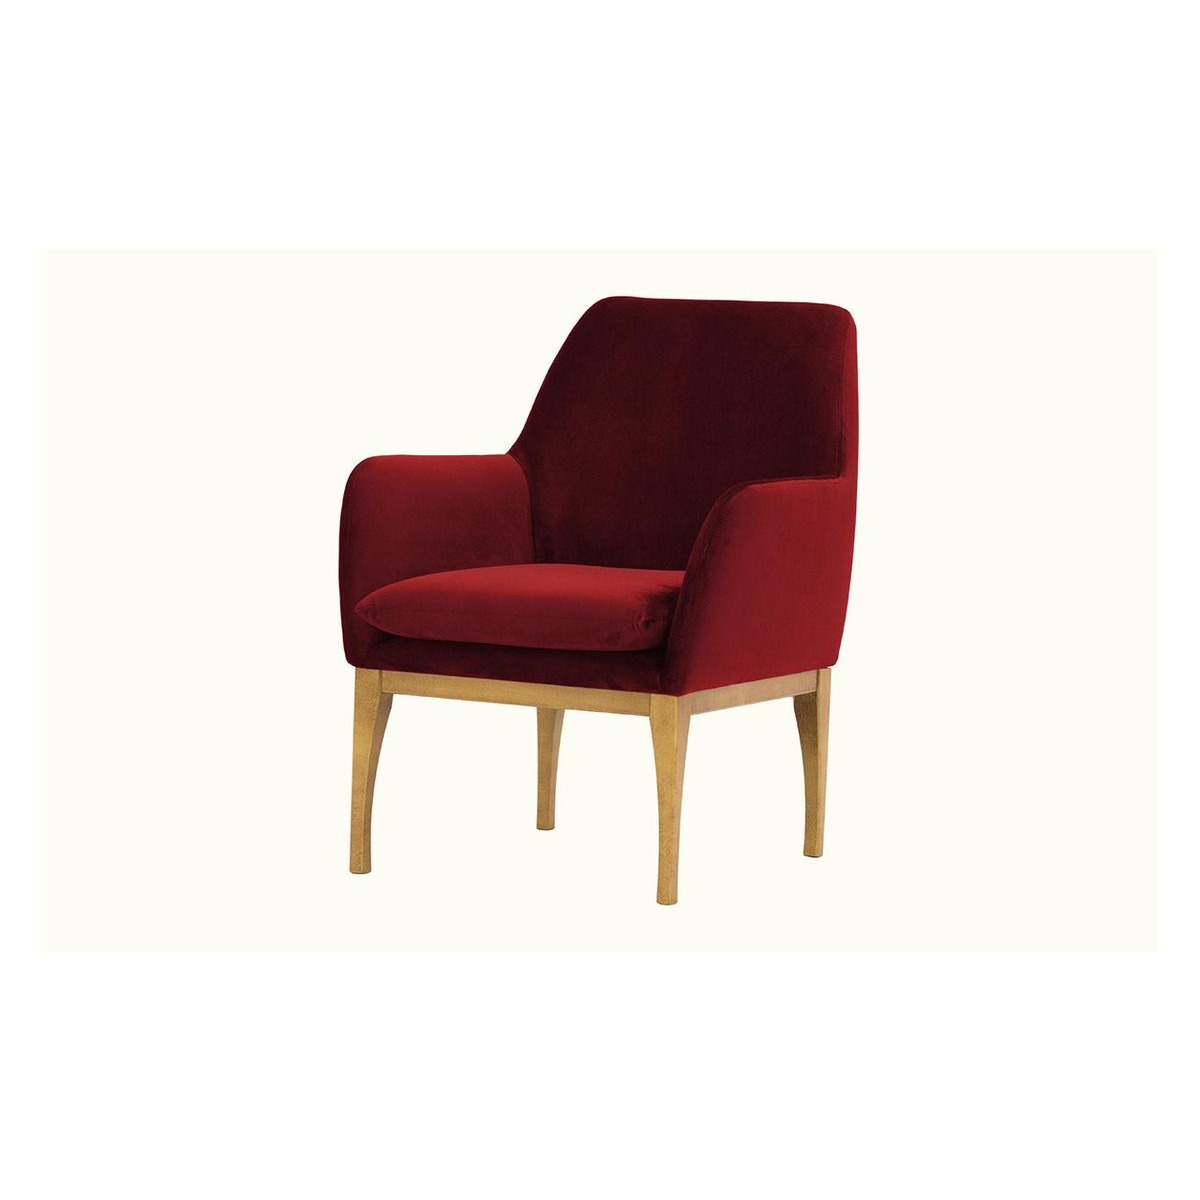 Beca Armchair with Wooden Legs, dark red, Leg colour: like oak - image 1